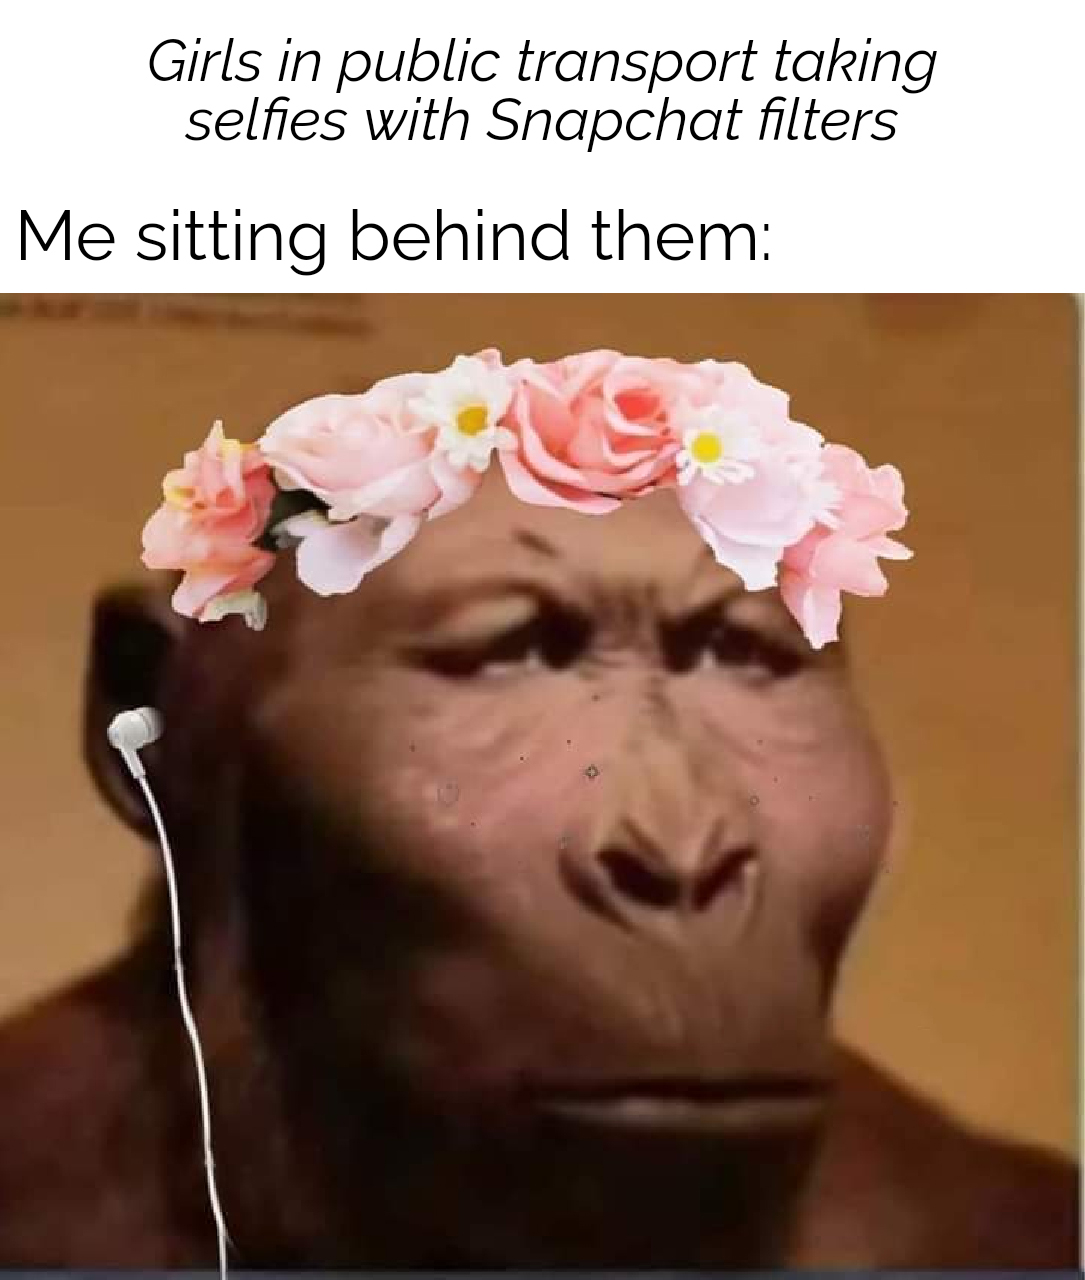 p robustus - Girls in public transport taking selfies with Snapchat filters Me sitting behind them